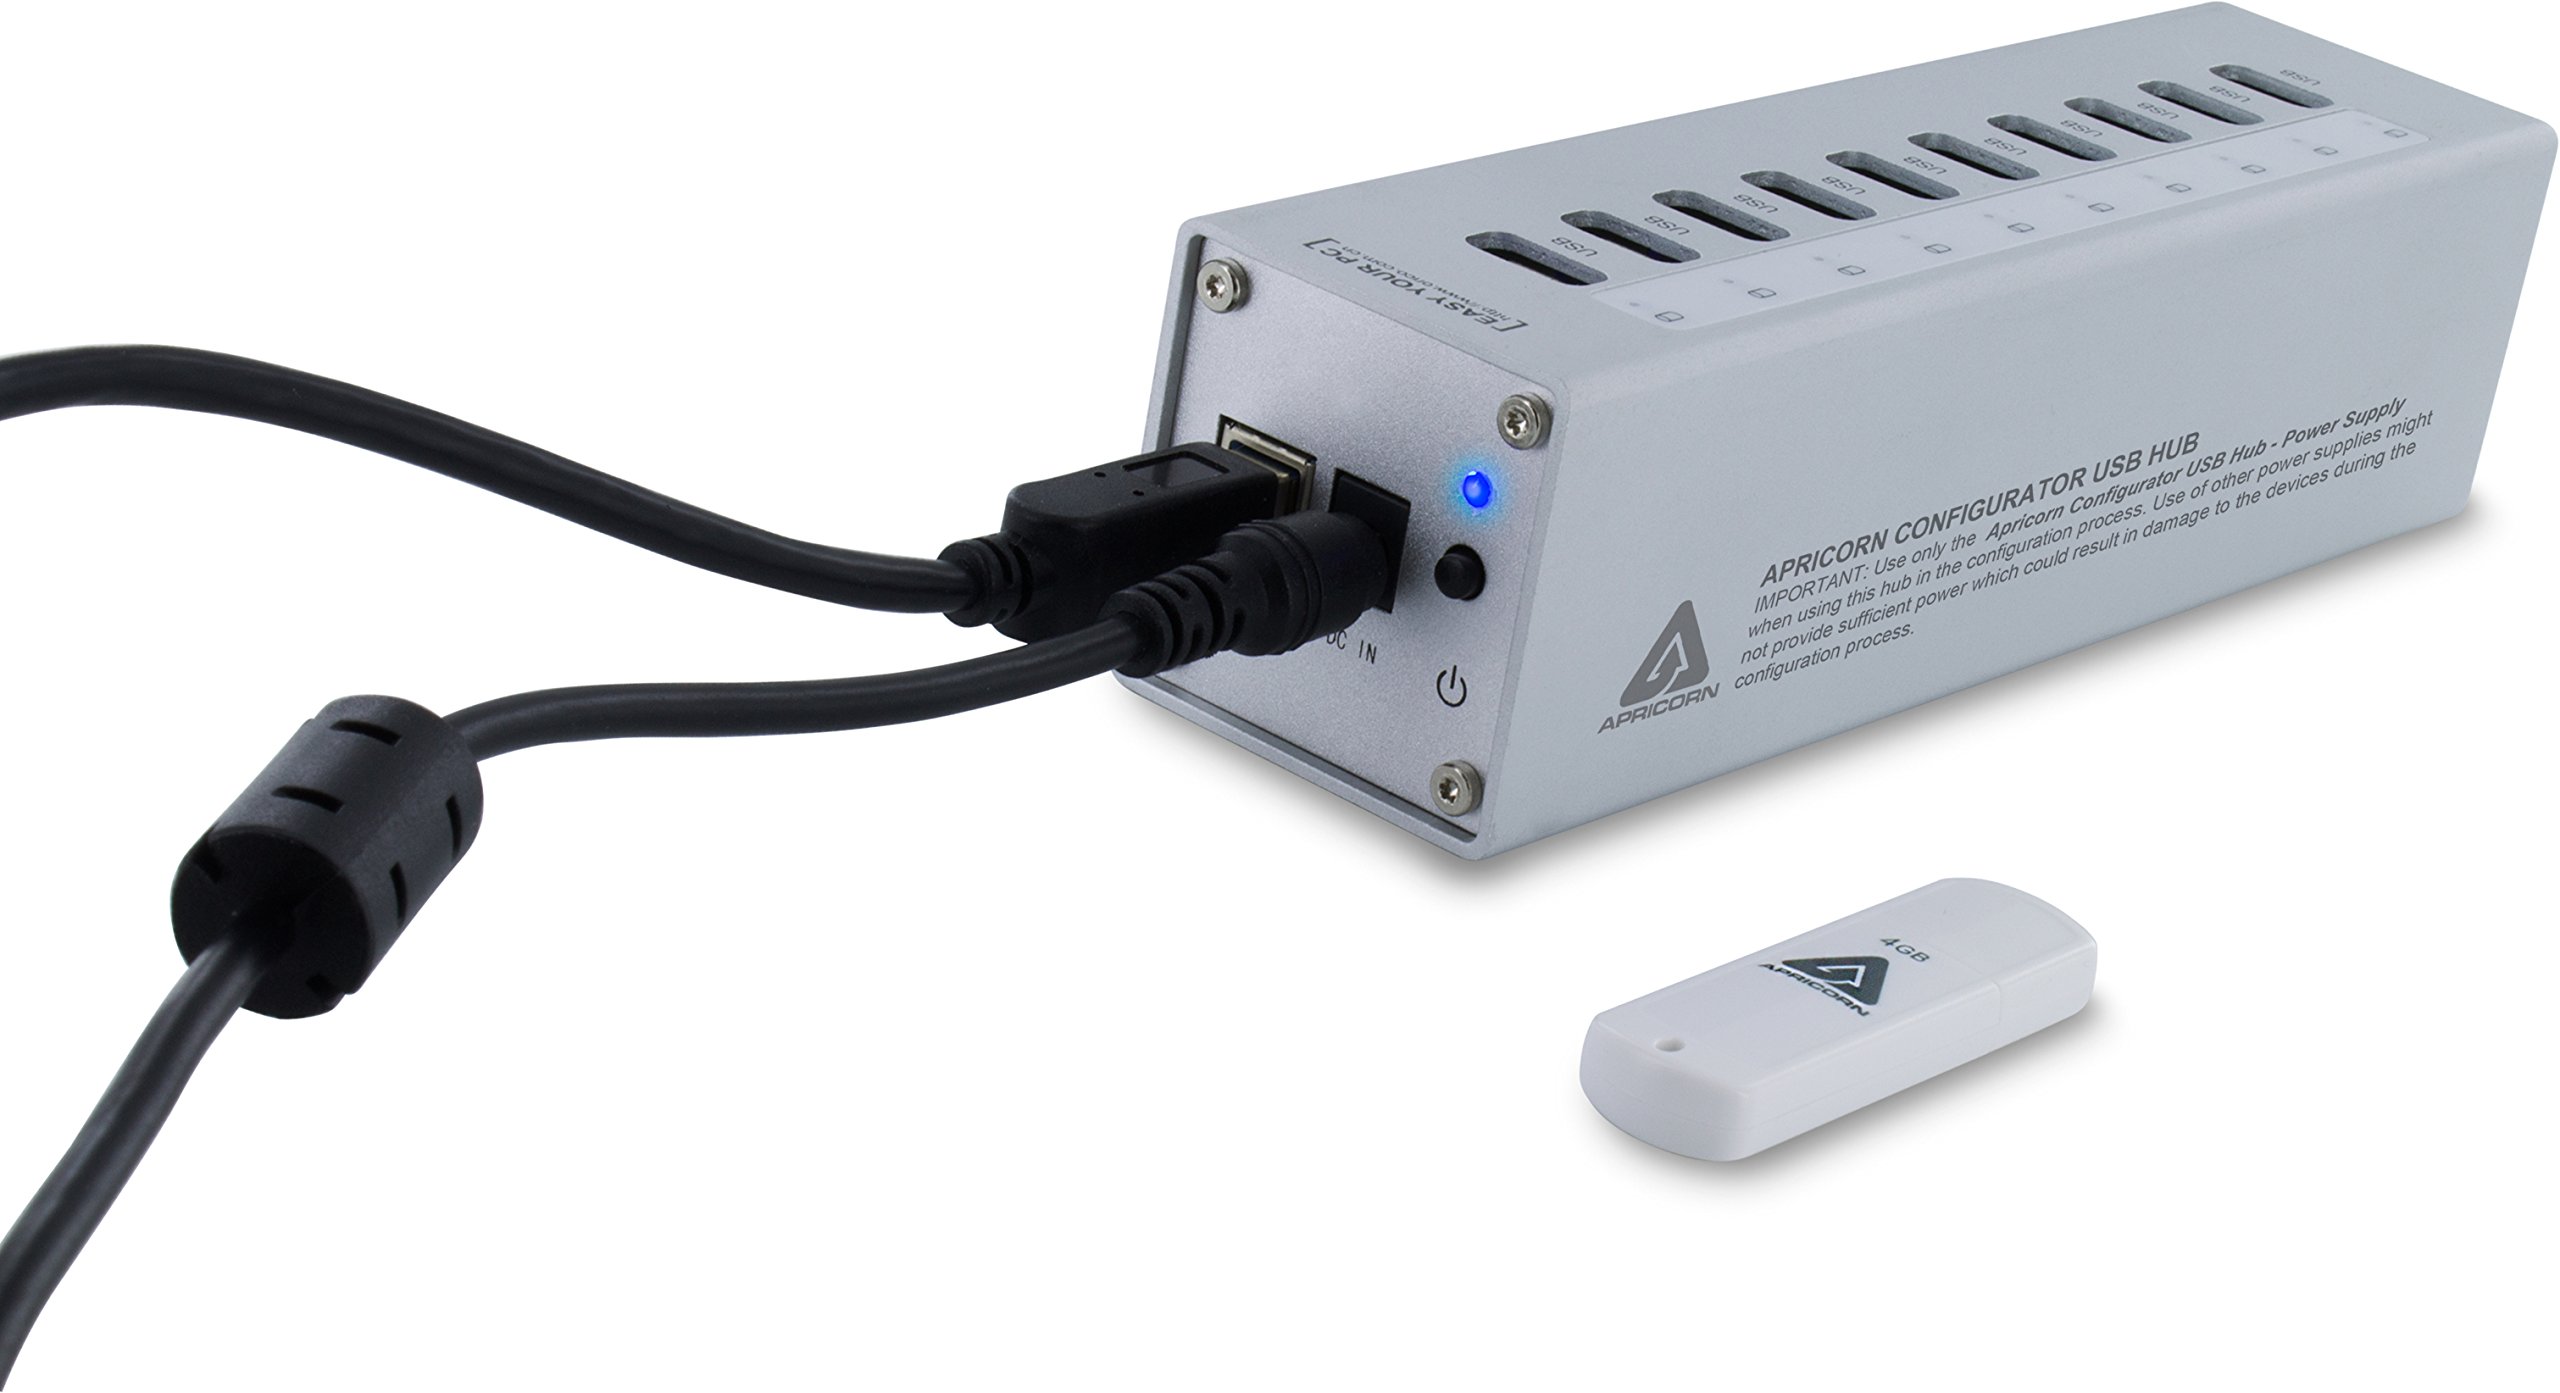 Apricorn Aegis Configurator On USB Key Bundled with Approved 10-Port USB Hub with 5 Amp Power Supply and Windows Based Software